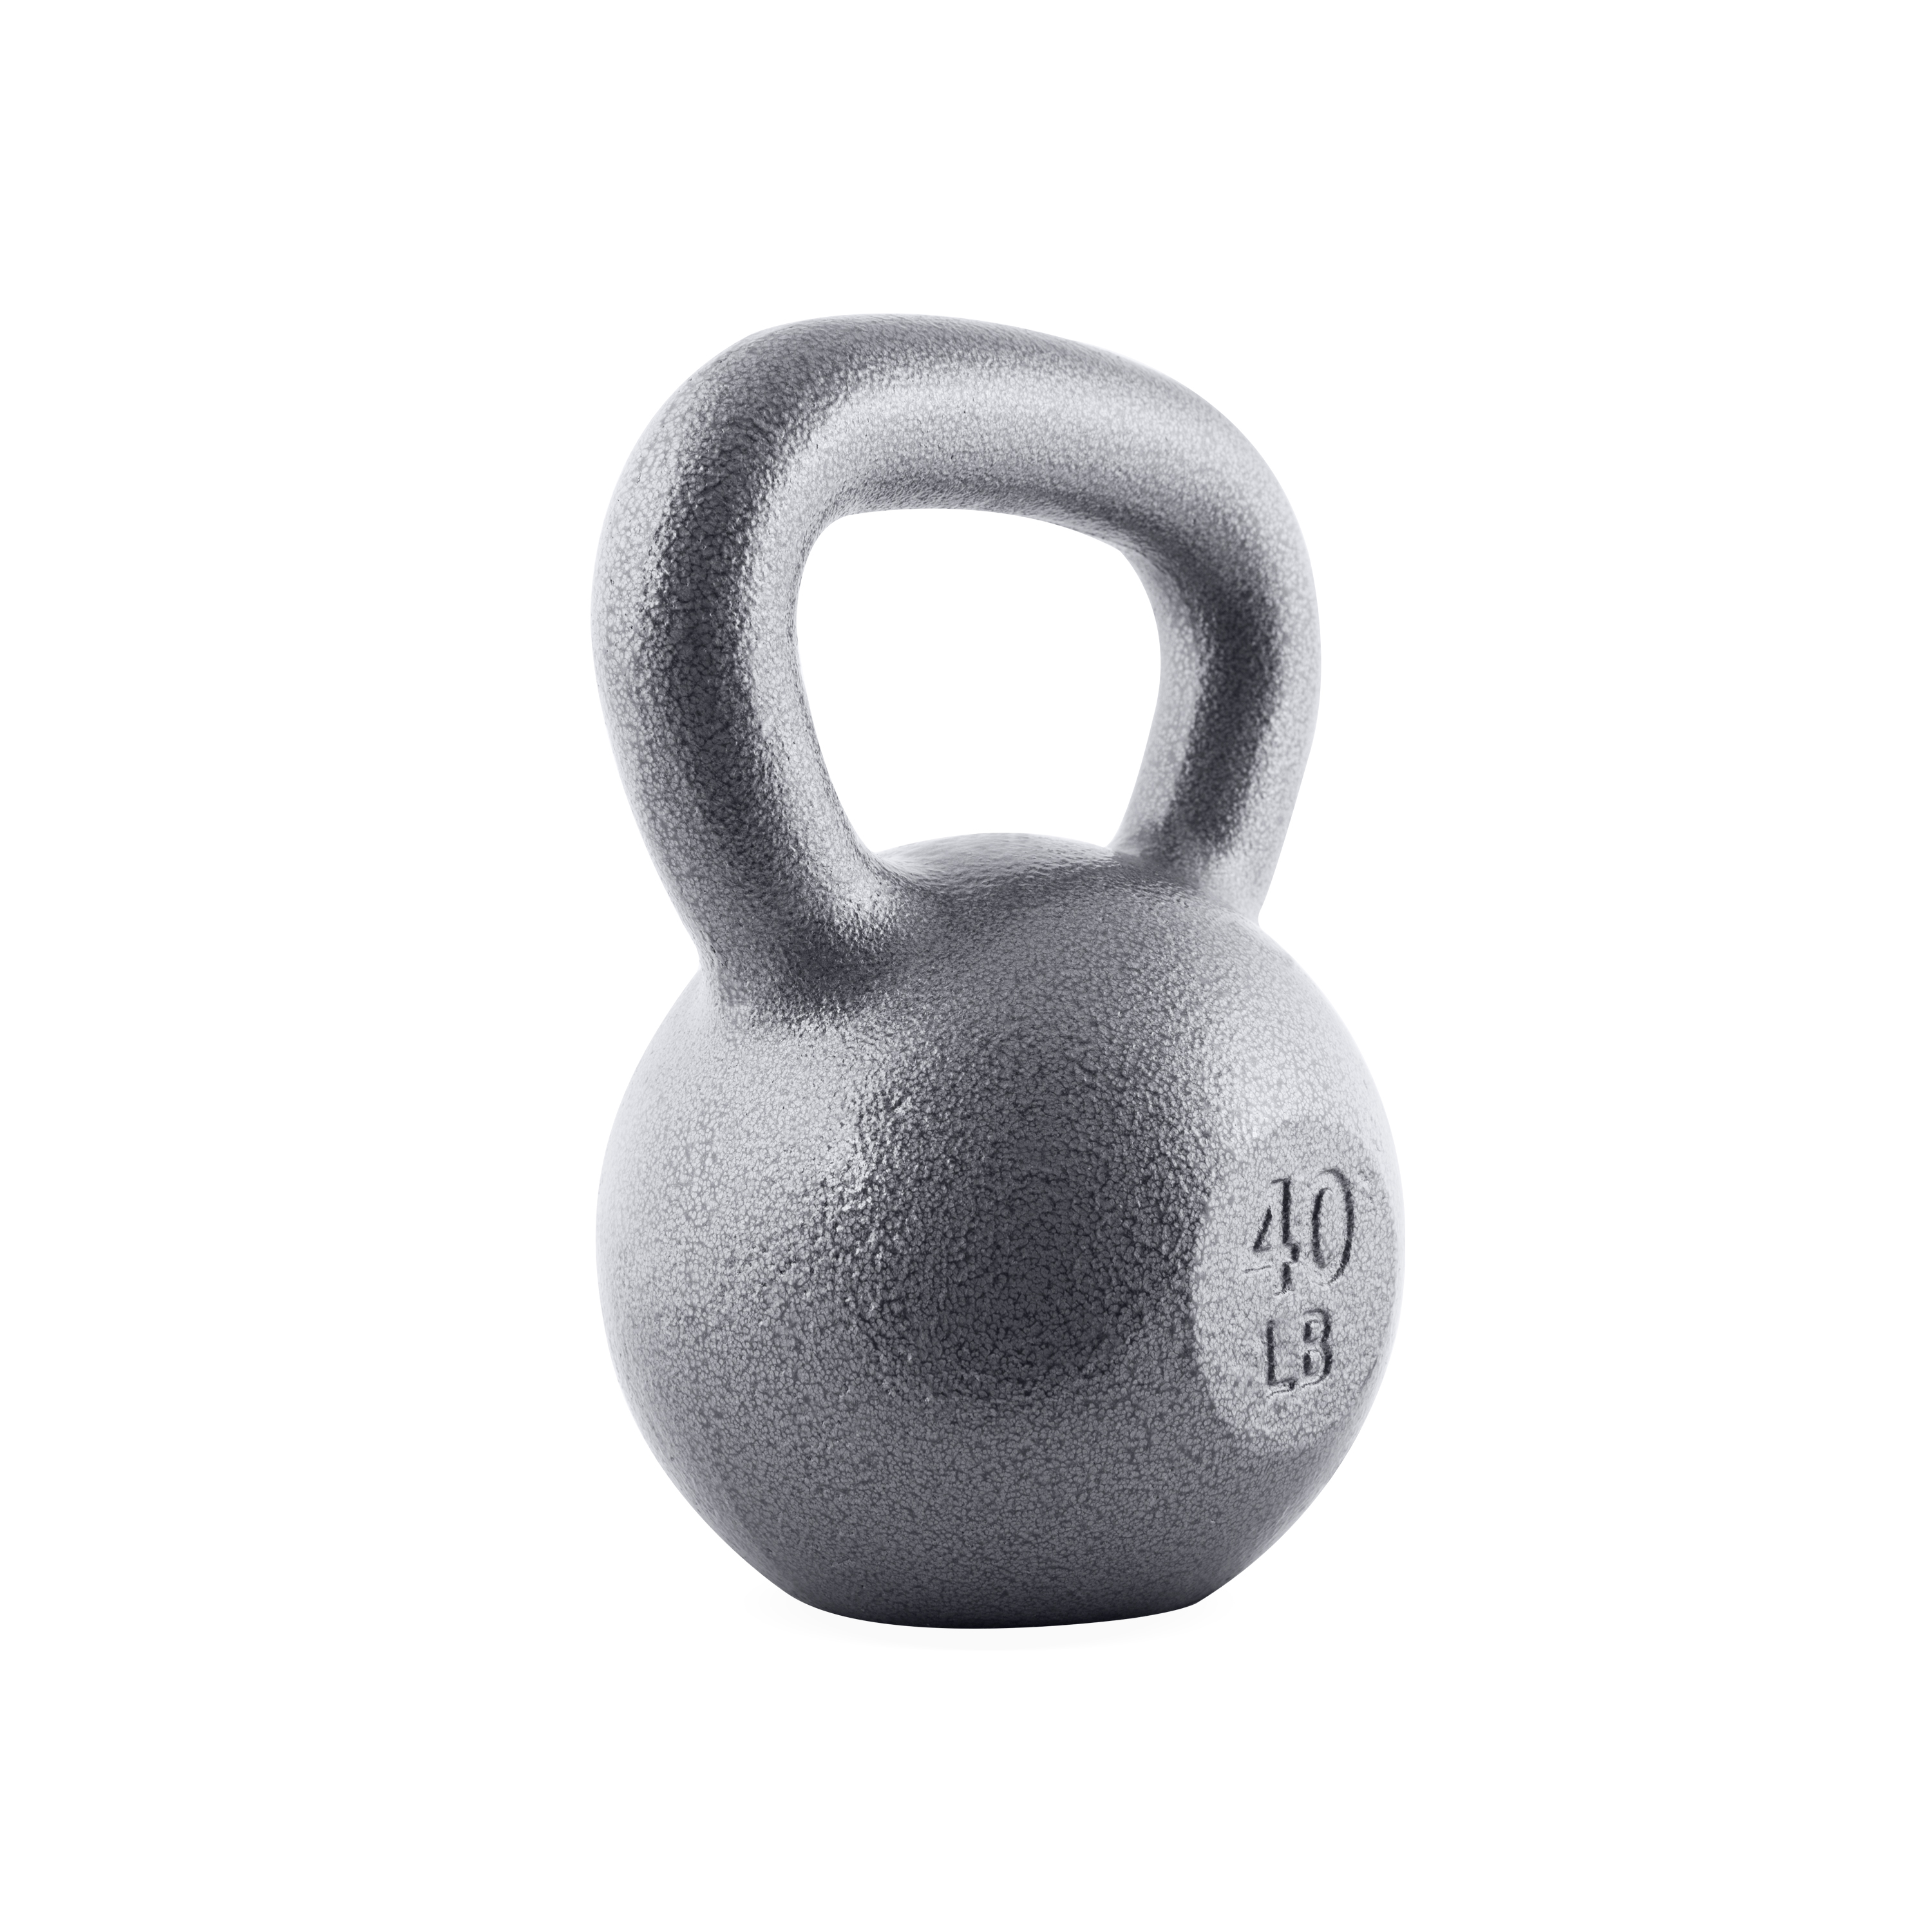 CAP Barbell Cast Iron Kettlebell, Single, 40-Pounds - image 5 of 8